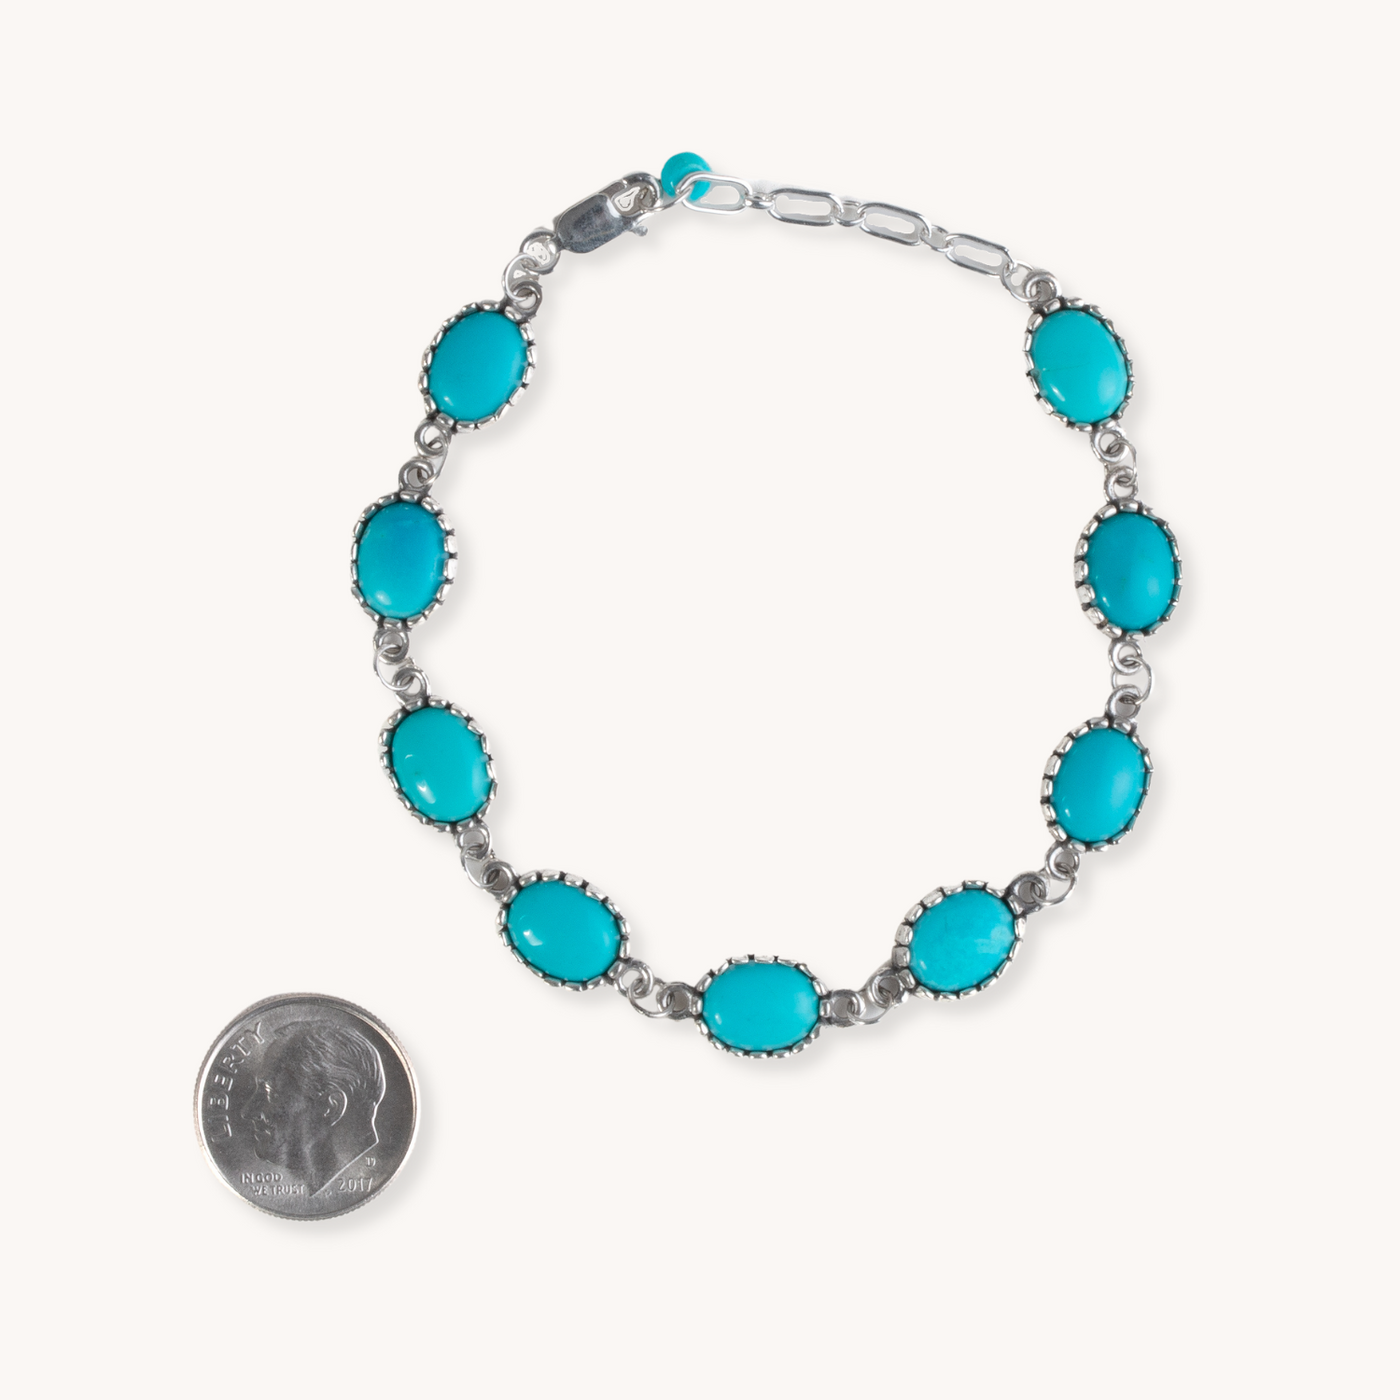 Turquoise Chain Bracelet by TSkies